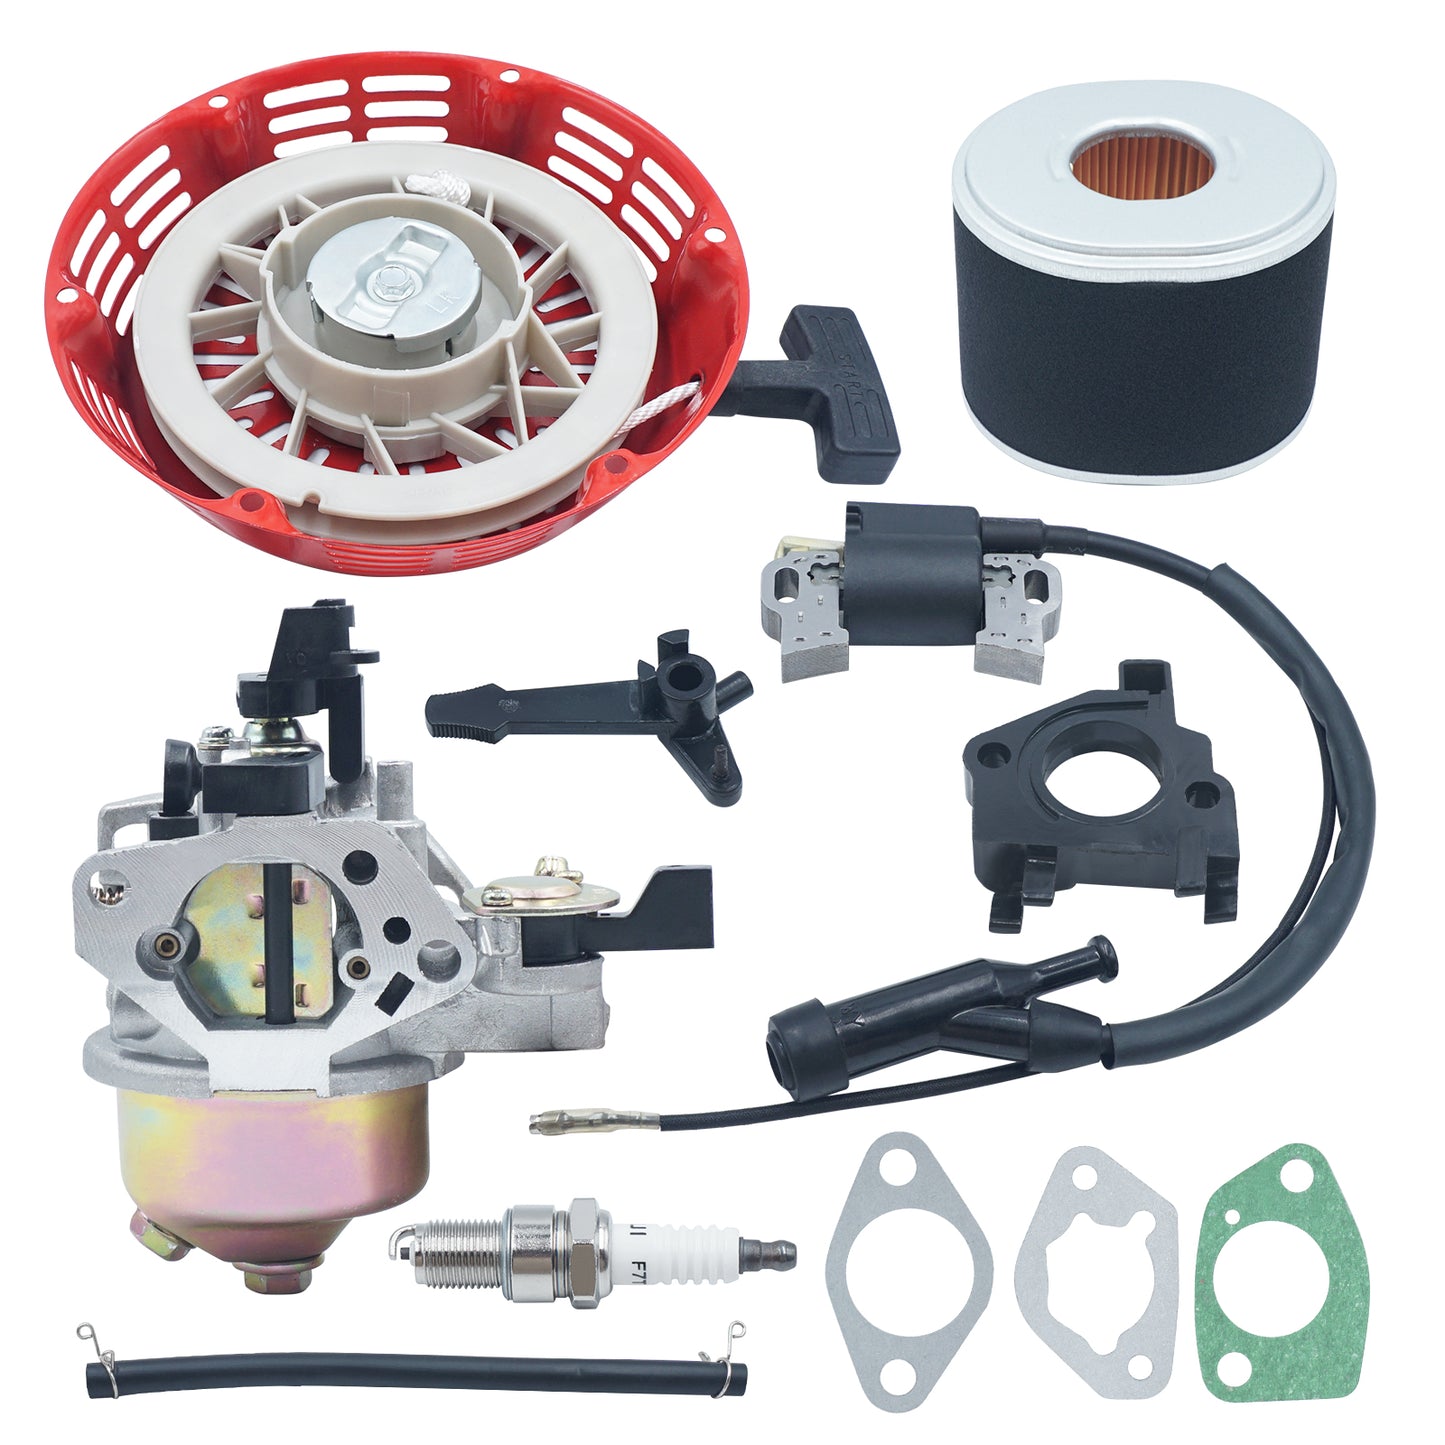 Triumilynn Carburetor kit for Honda GX390 GX340 13HP 11HP 4-Stroke Engine Lawnmower Water Pumps 16100-ZF6-V01 with Air Filter Ignition Coil Recoil Starter Spark Plug